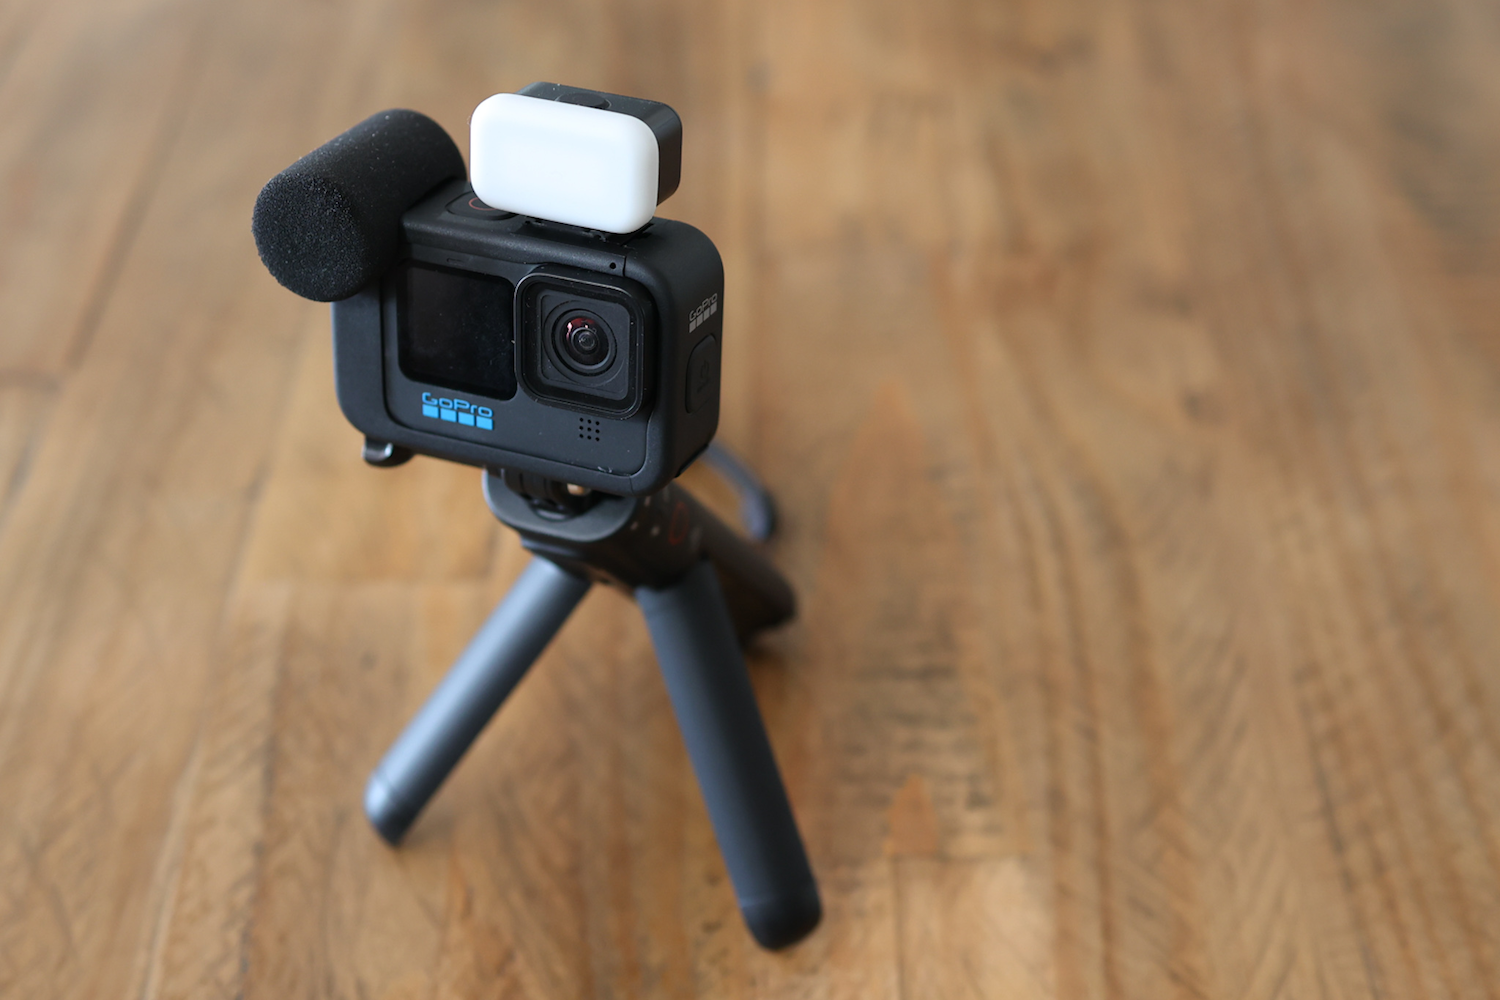 Gopro Hero Case Insert Fits Camera, Volta Hand Grip, and More 